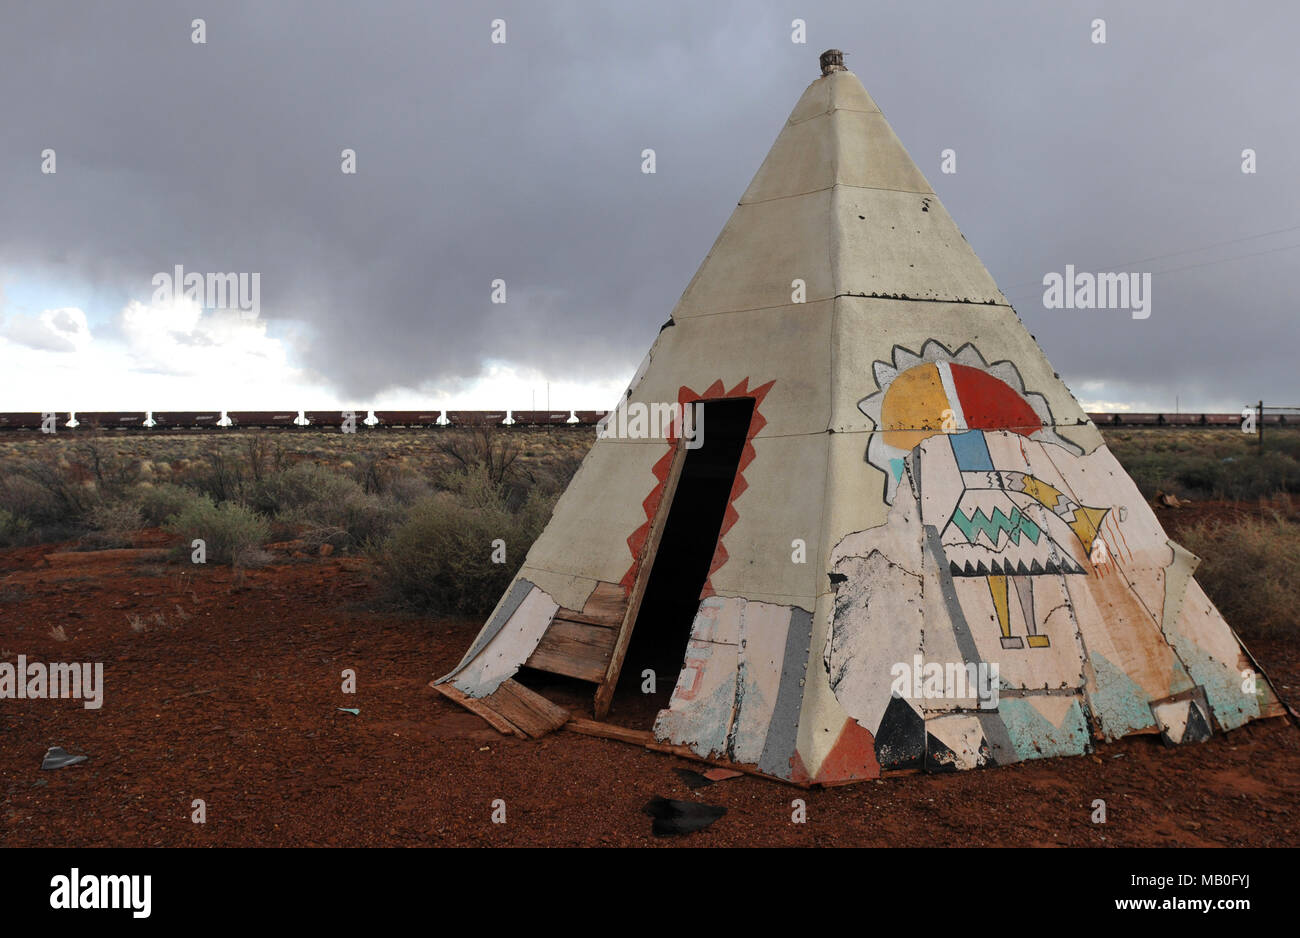 A tepee-style structure stands at the Meteor City Trading Post near Winslow, Arizona. Closed since 2012, the Route 66 landmark is now being restored. Stock Photo